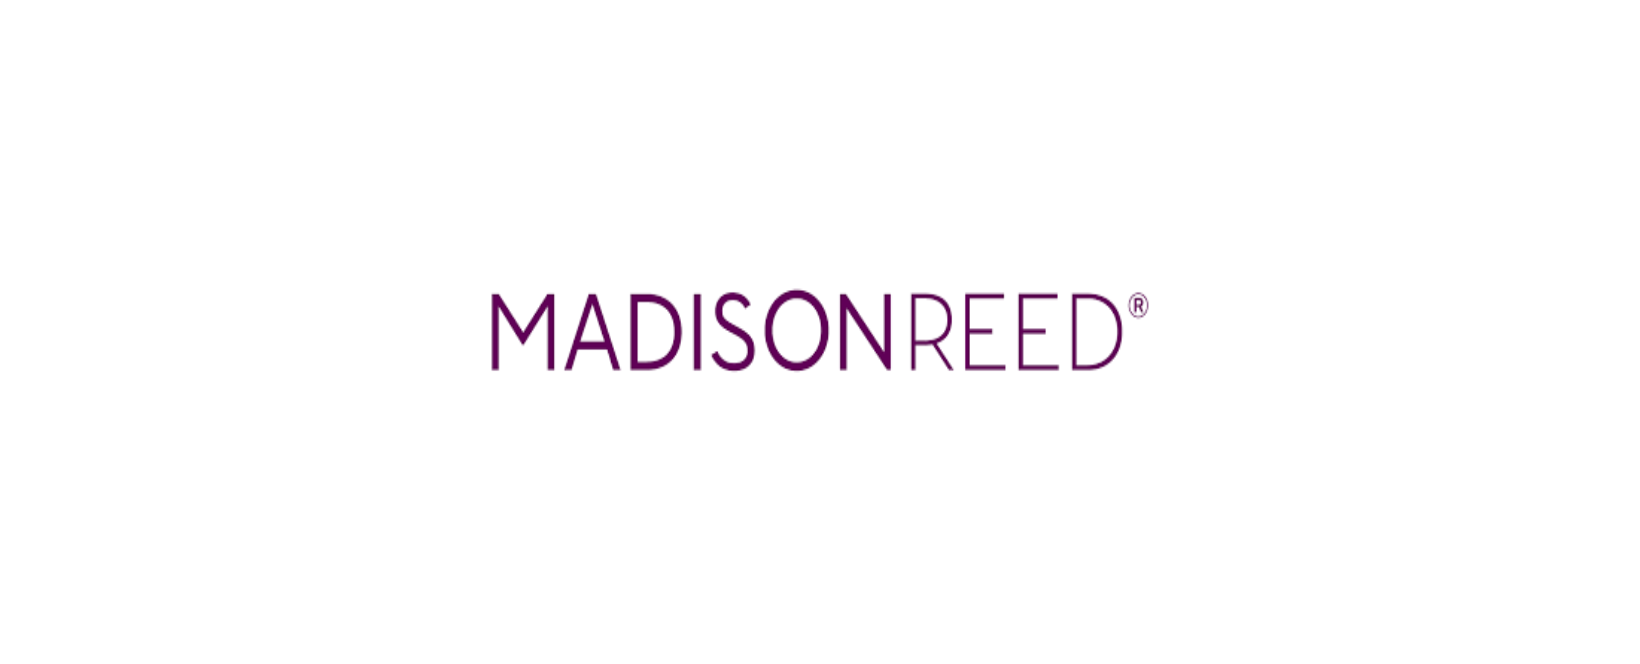 Madison-Reed Discount Code 2022